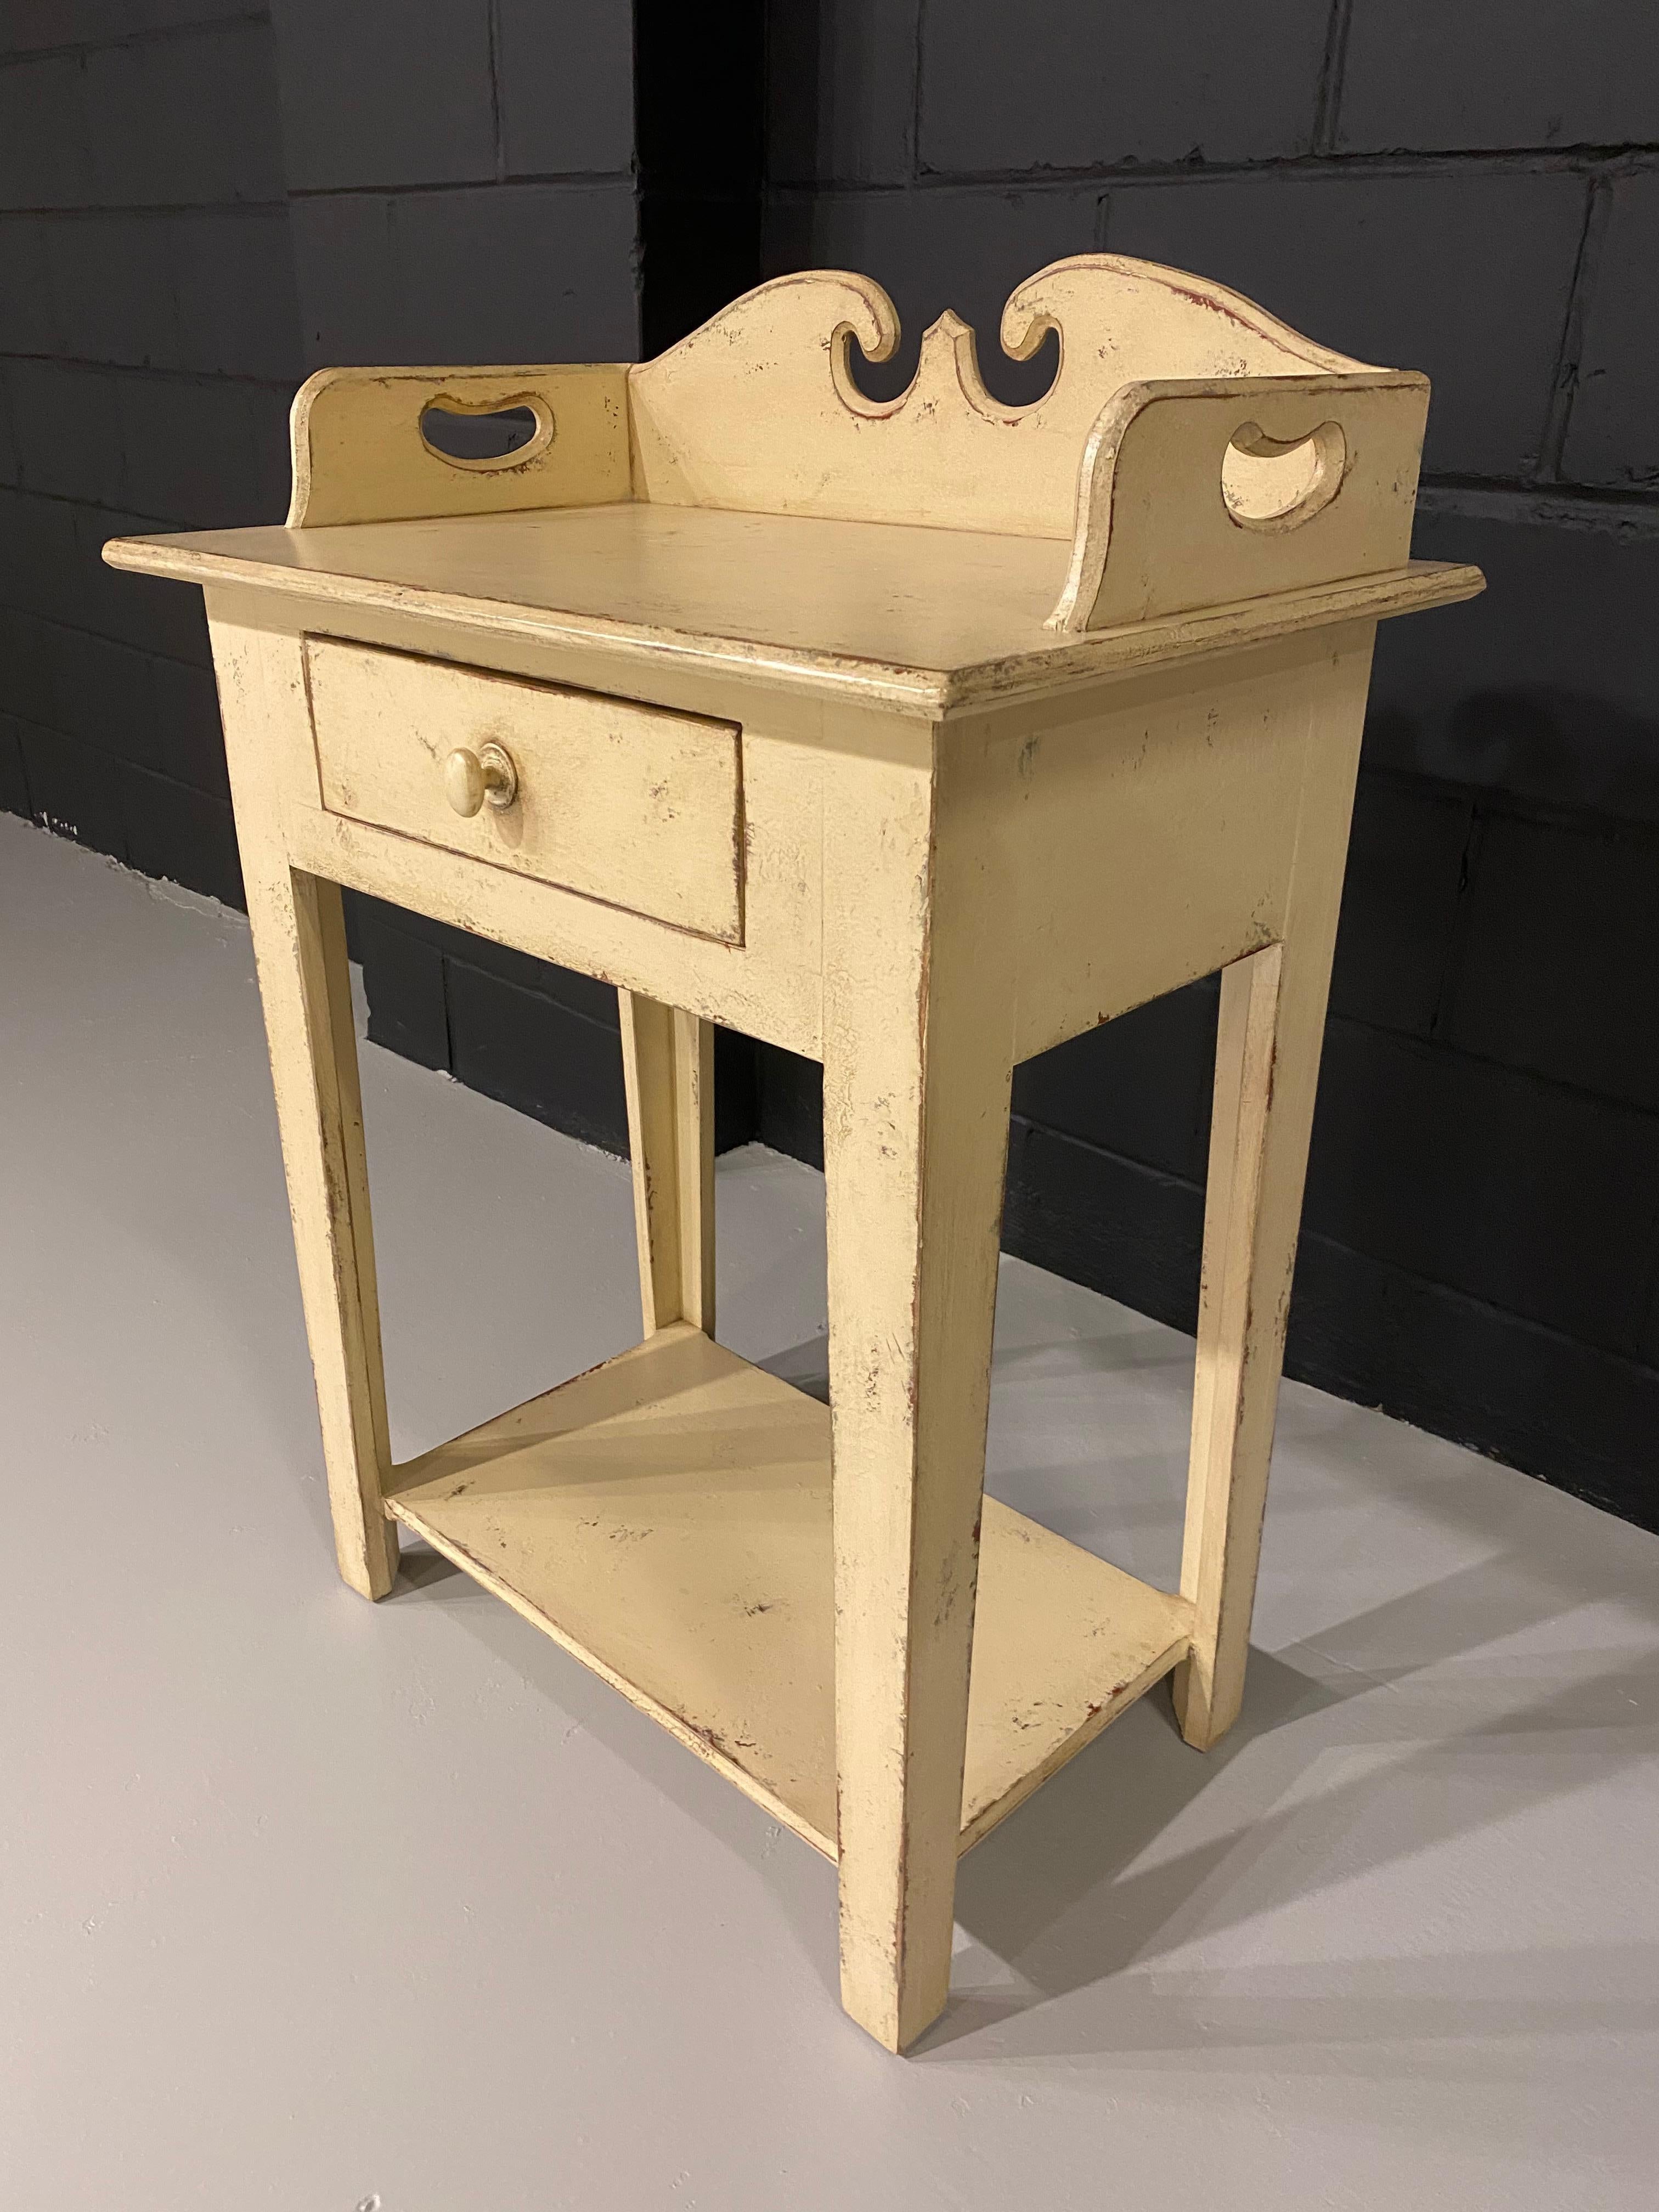 A pine wash stand made by Eddie West, with a vanilla color antique style paint finish. There is one drawer in this washstand.